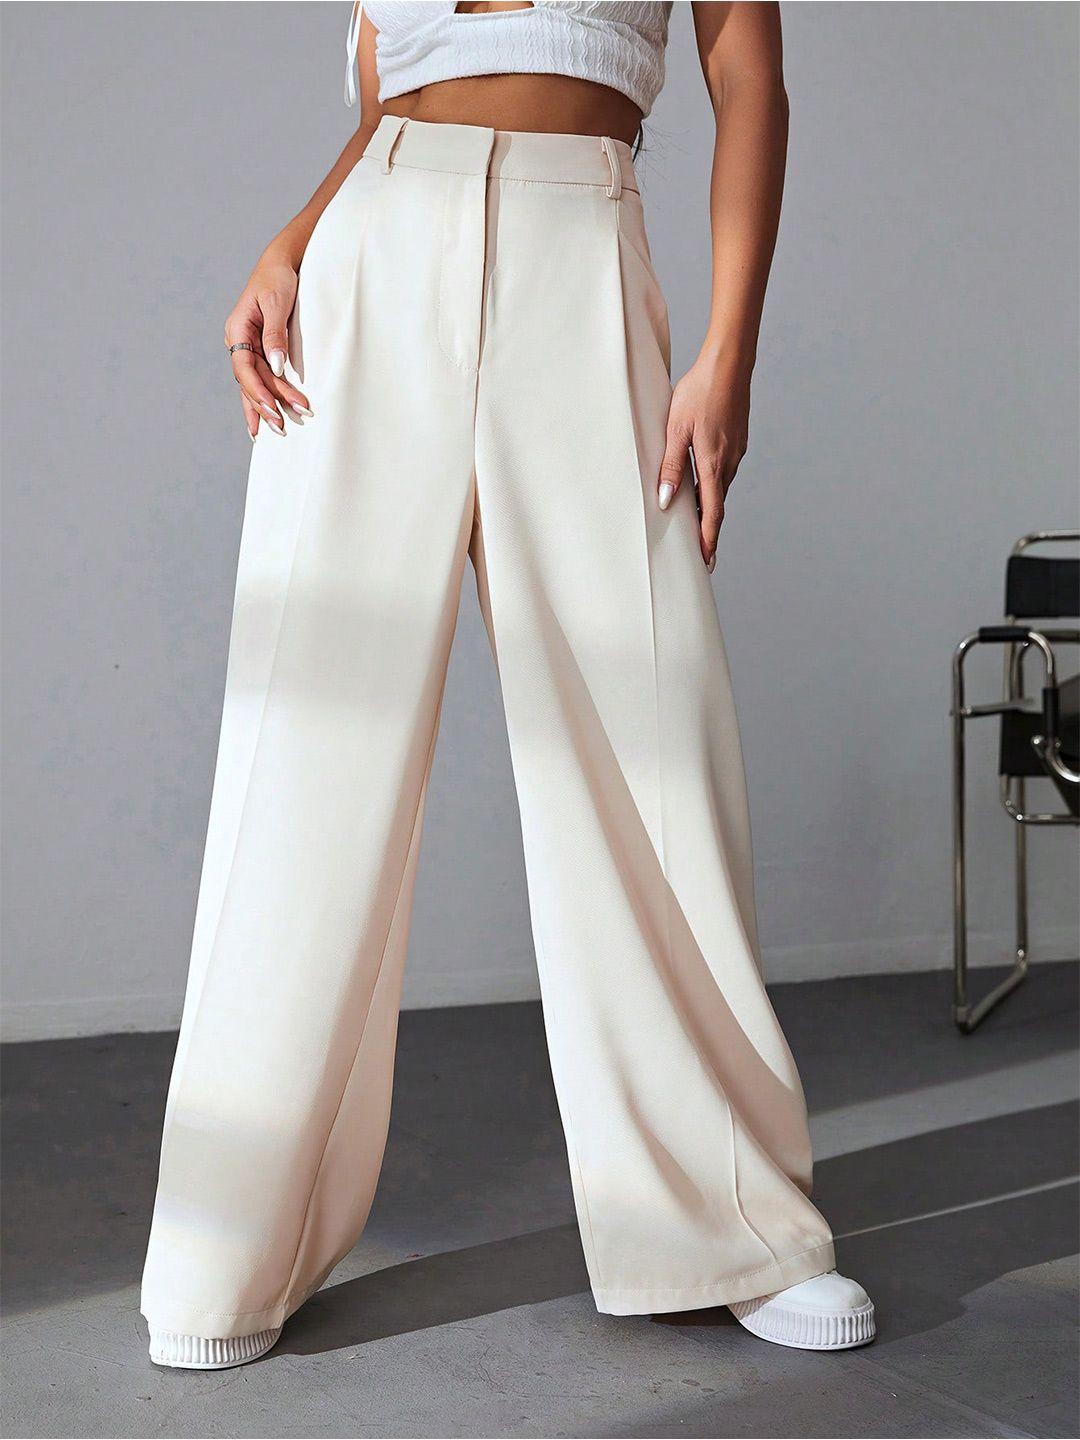 aahwan-women-loose-fit-high-rise-plain-parallel-trousers